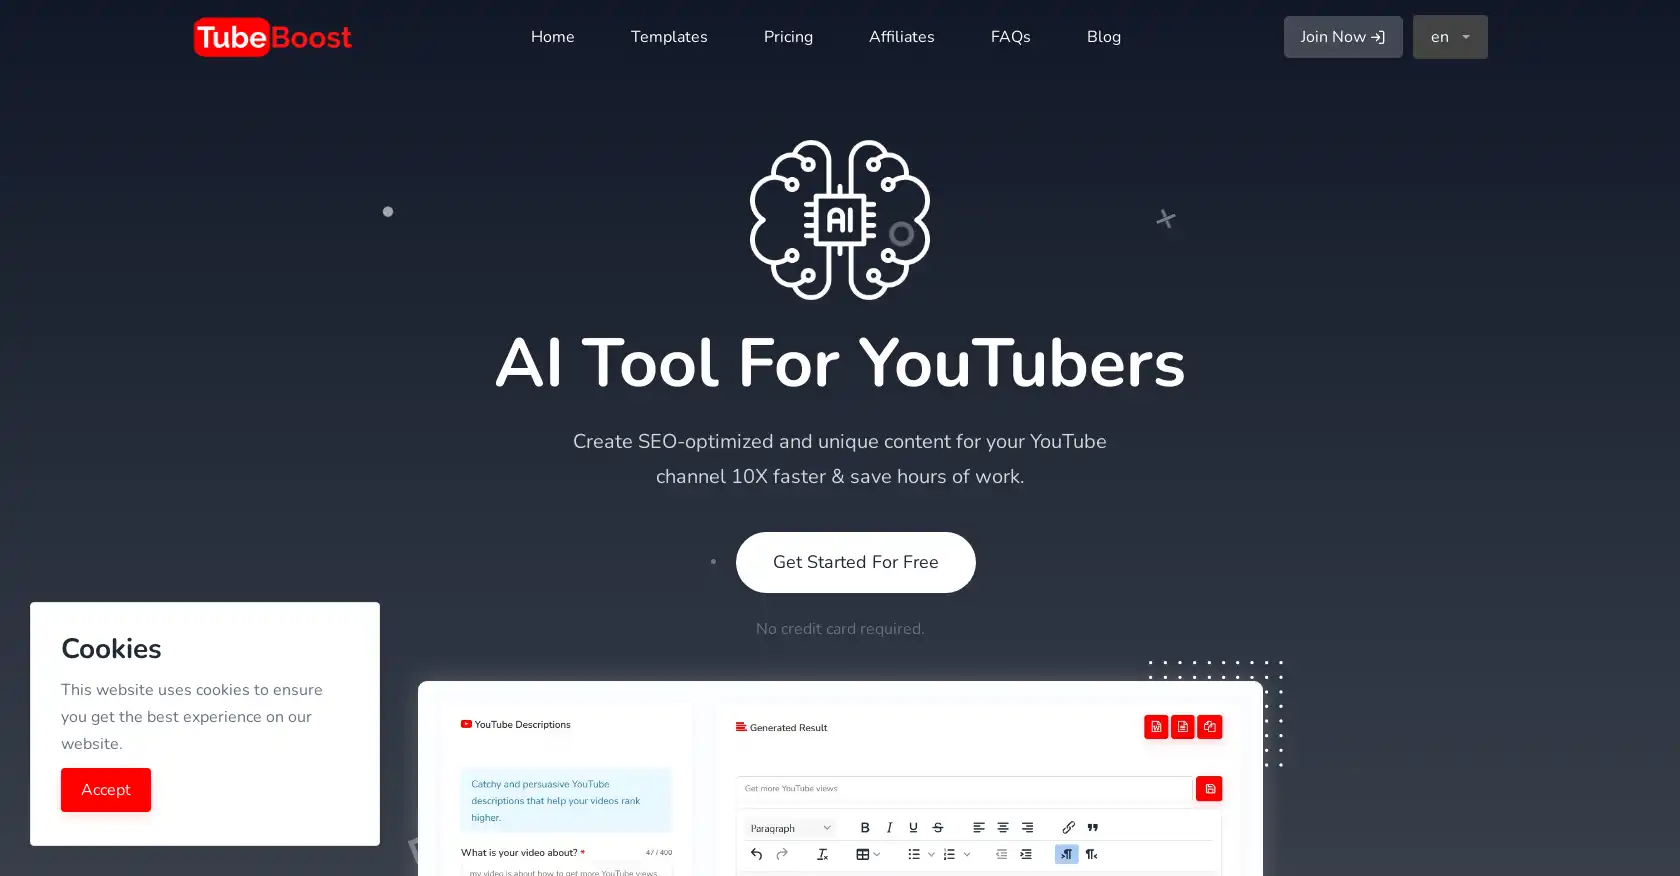 TubeBoost - AI tool for Content Creation, SEO, YouTube